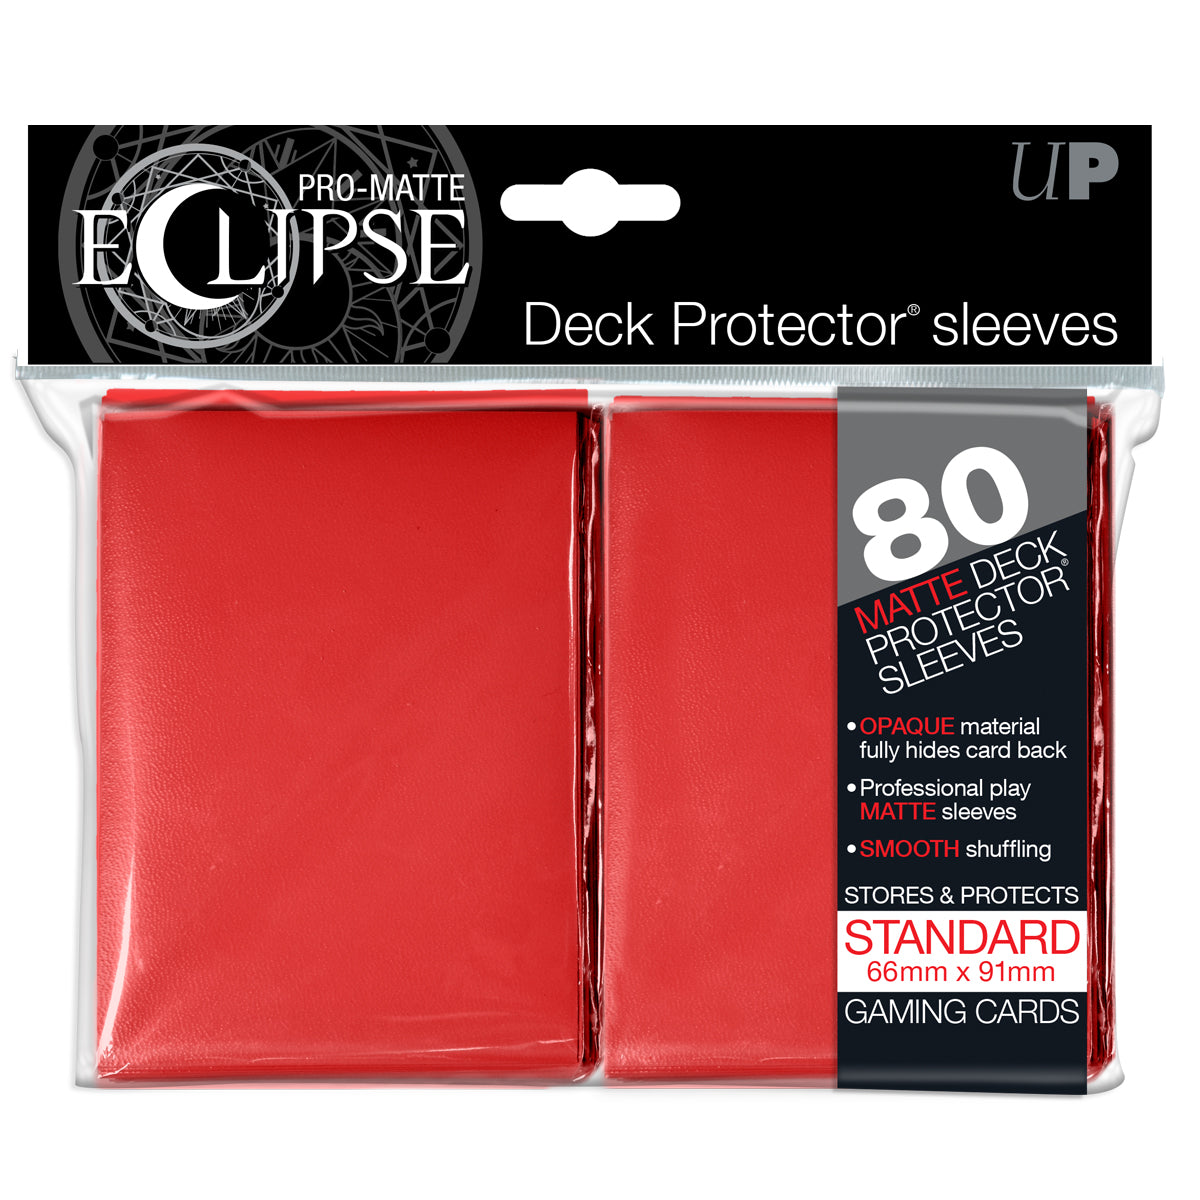 Ultra PRO Card Sleeve Pro-Matte Eclipse Standard 80ct - Red